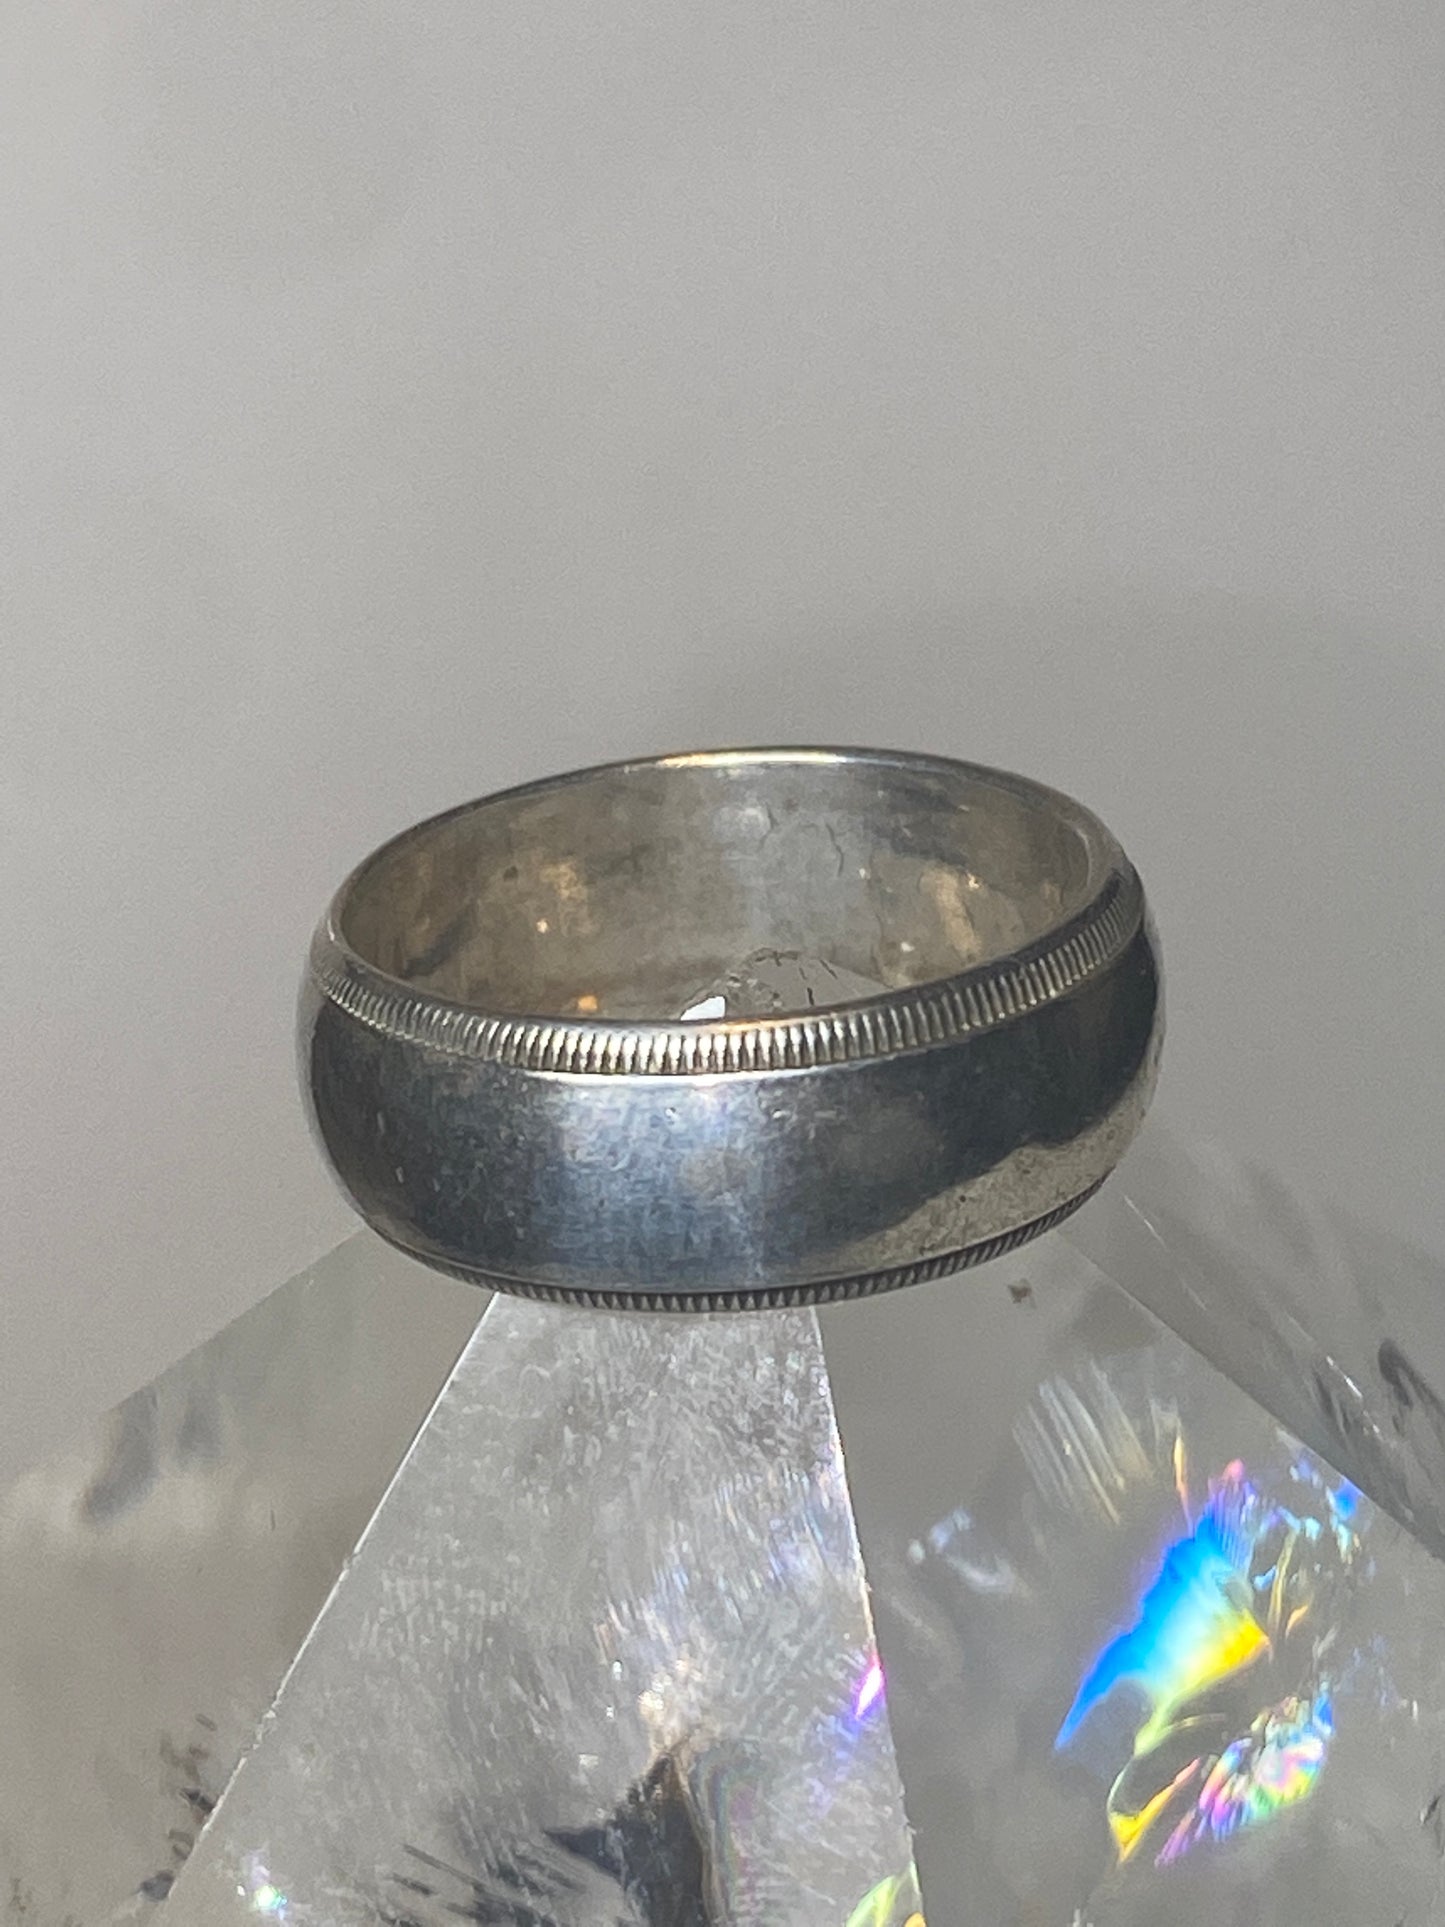 Vintage Plain ring size 5.25 wedding band stacker sterling silver S